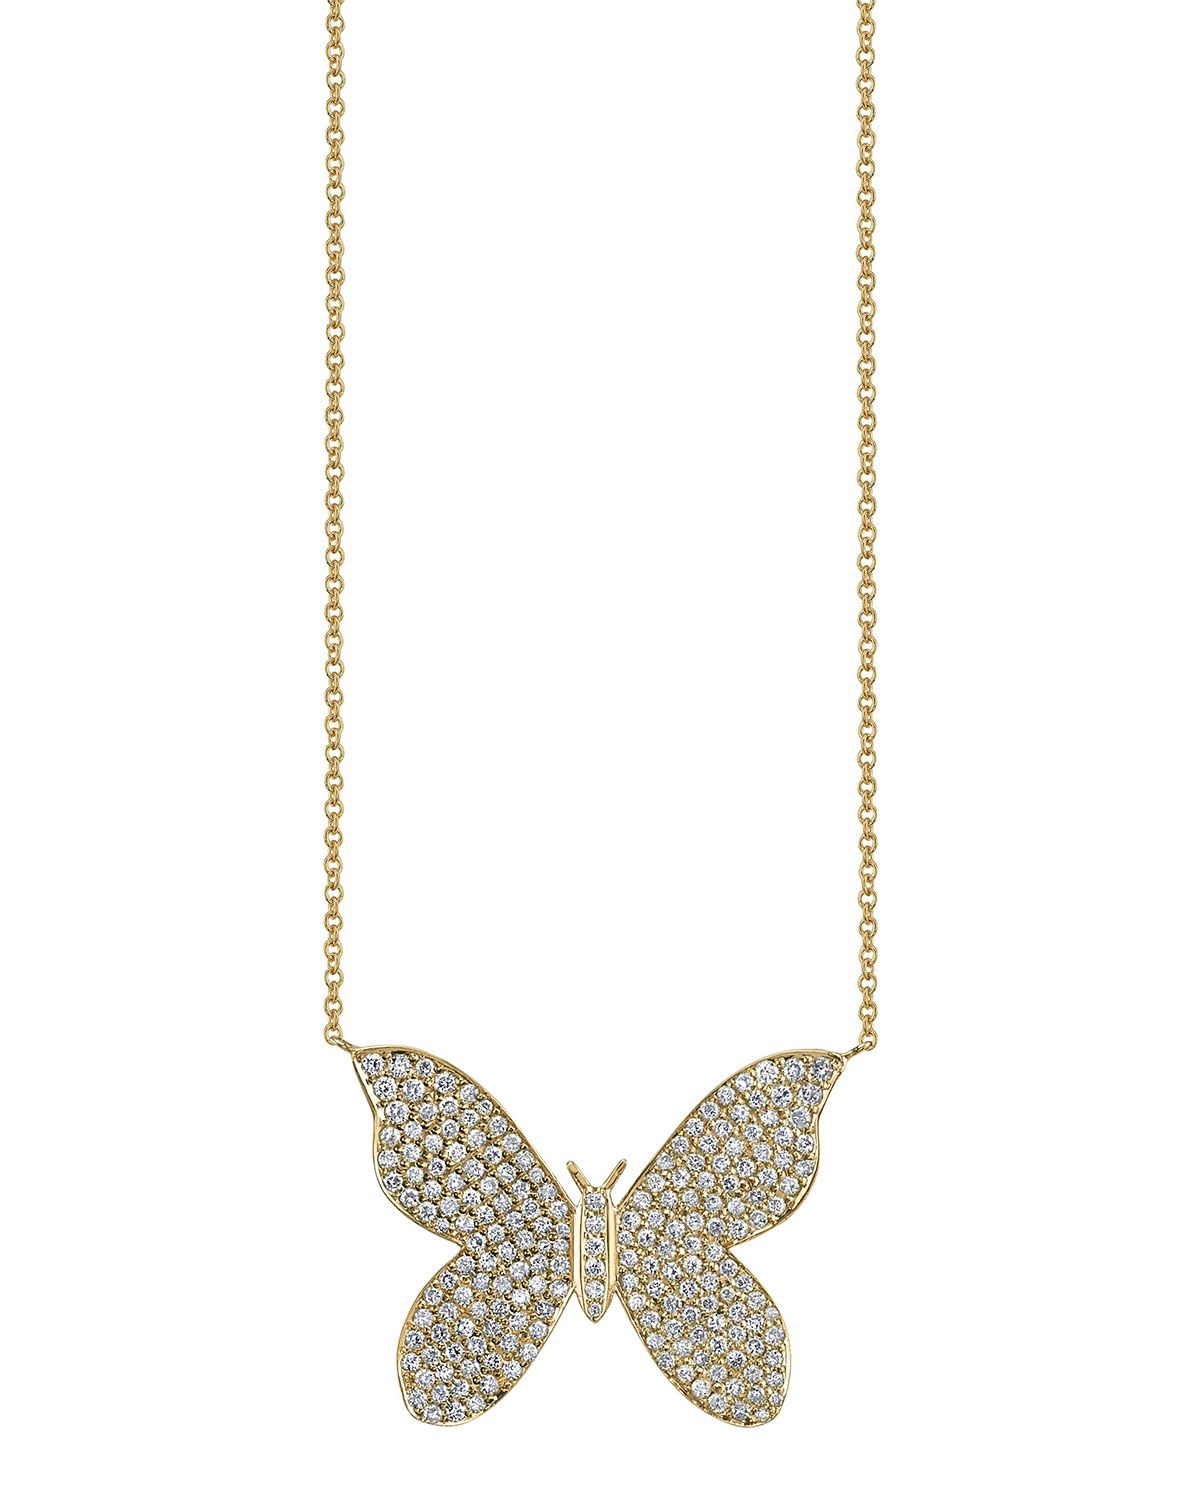 Large Pave Diamond Butterfly Pendant Necklace With Most Up To Date Pavé Butterfly Pendant Necklaces (View 2 of 25)